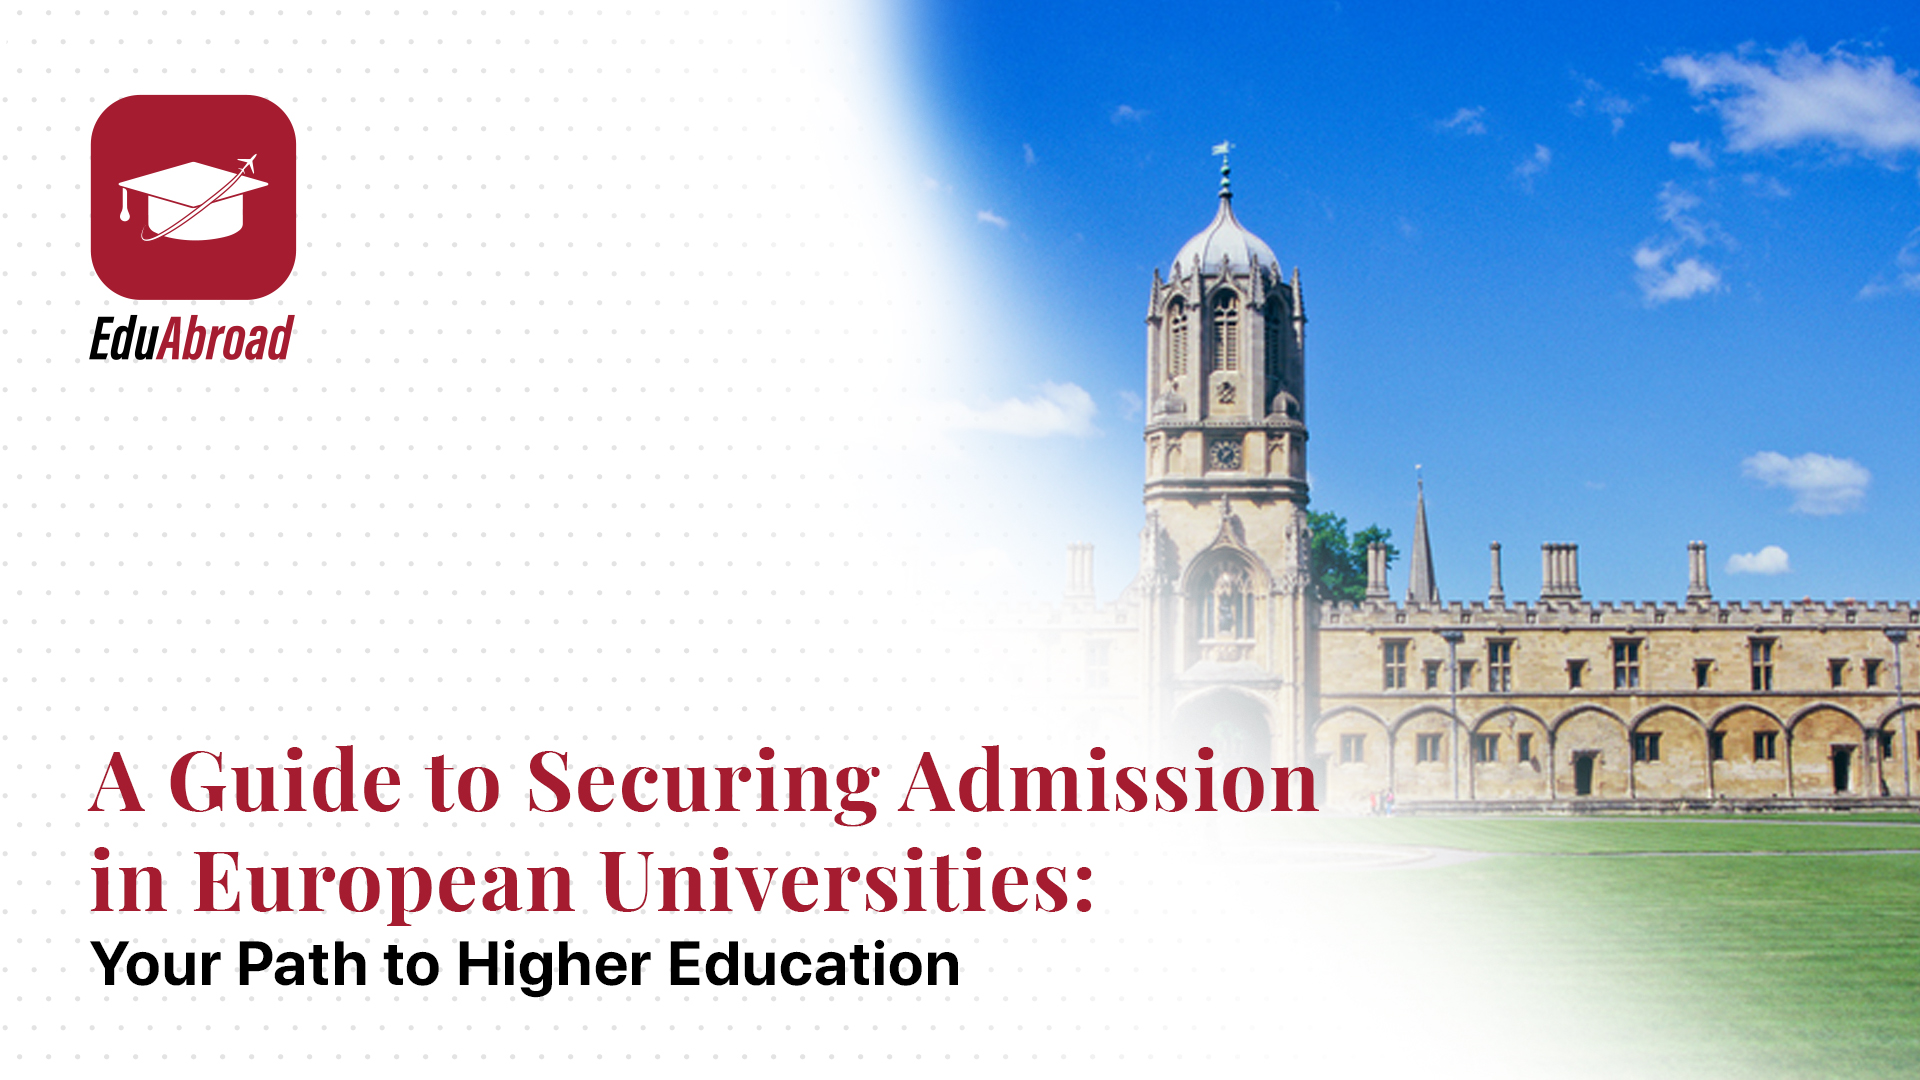 A Guide to Securing Admission in European Universities: Your Path to Higher Education